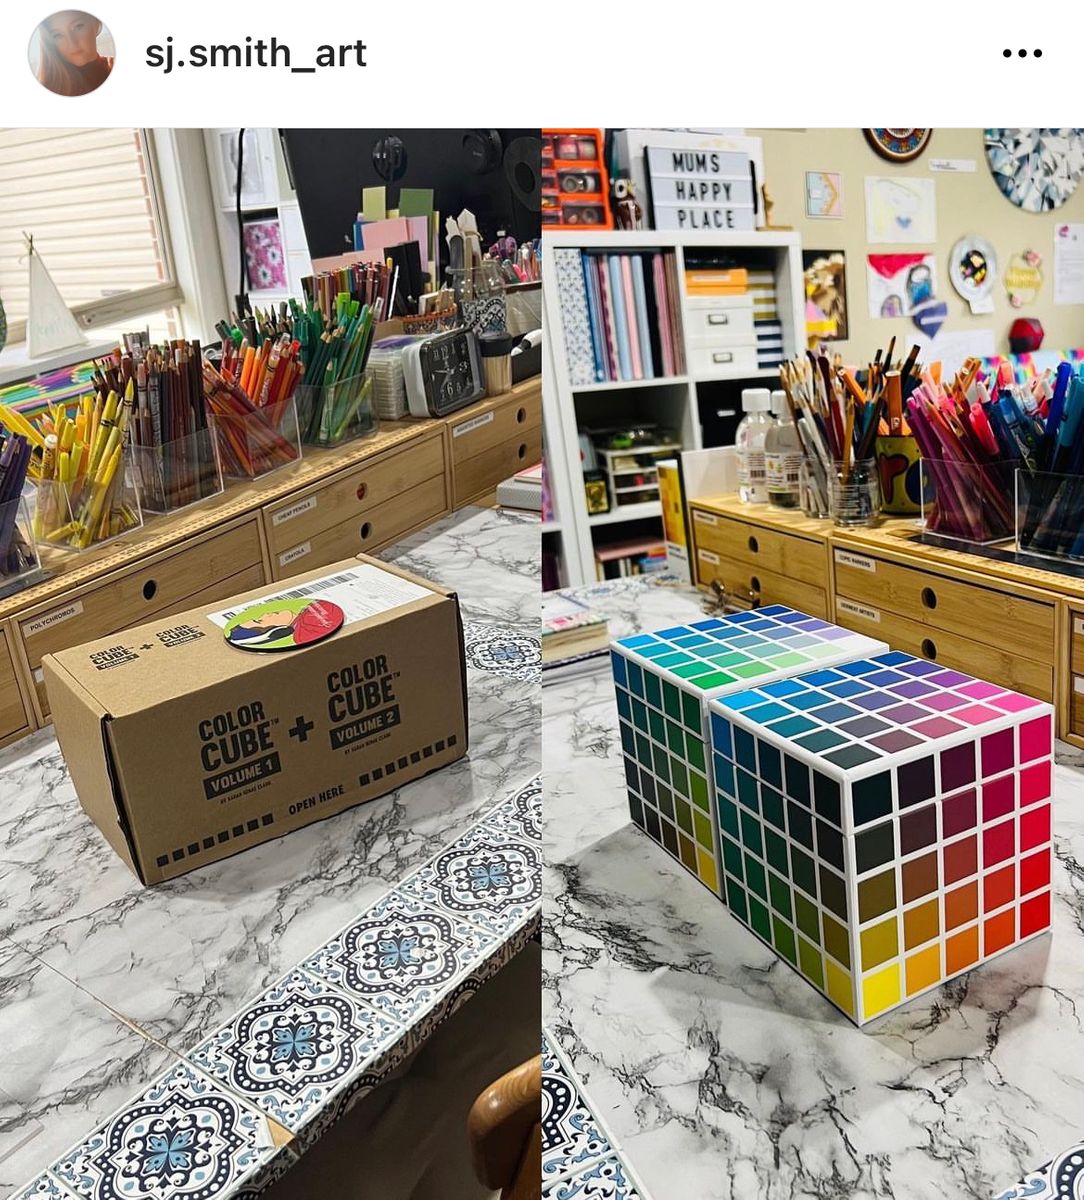 Using The Color Cube to Choose My Colors!! 